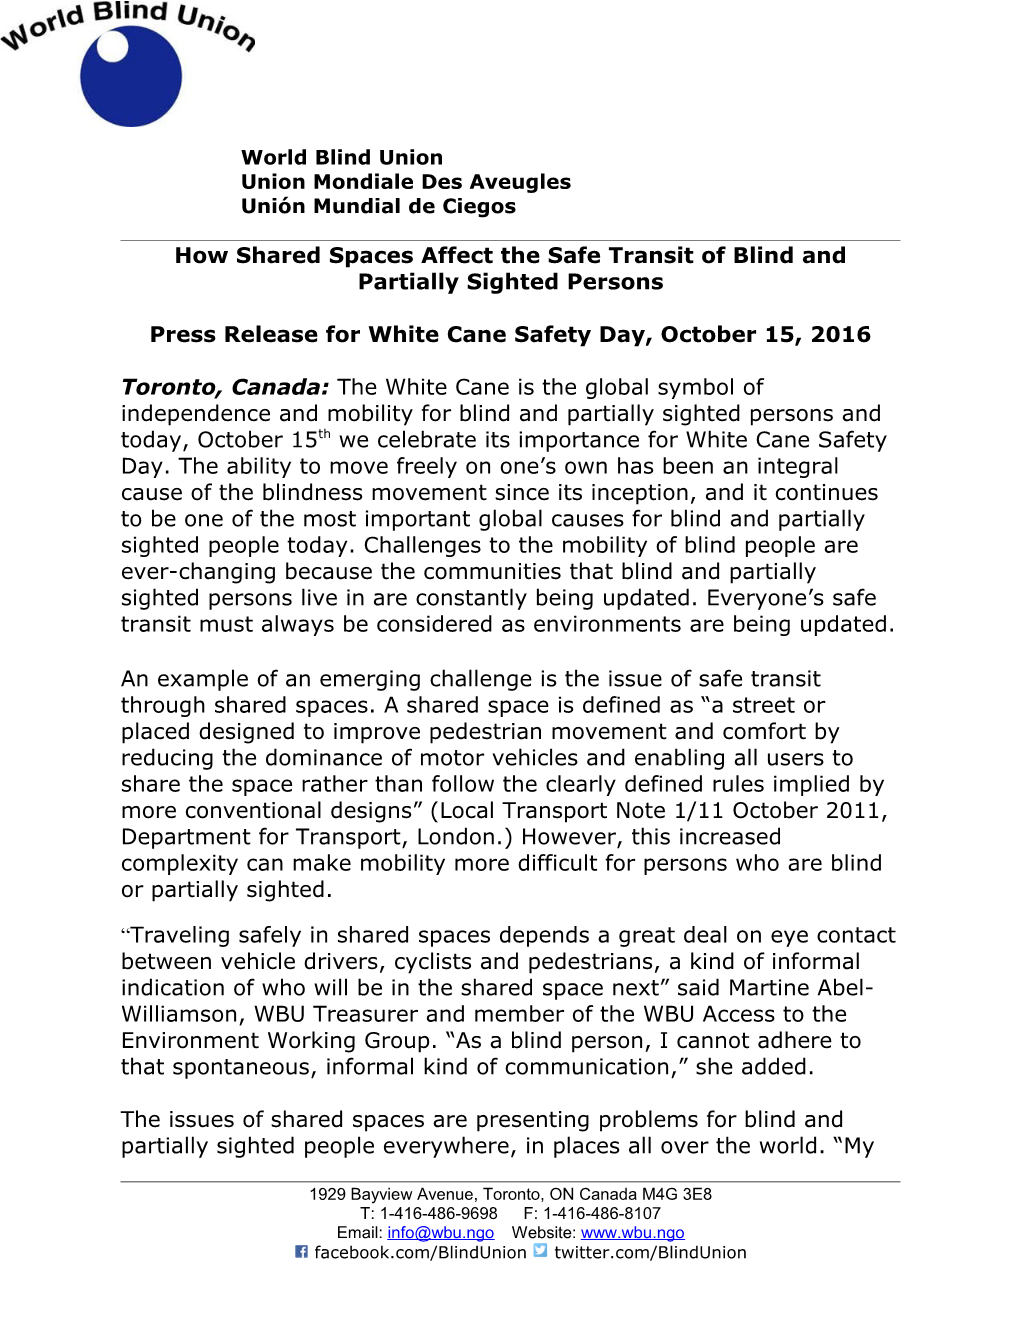 Press Release - White Cane Safety Day 2016